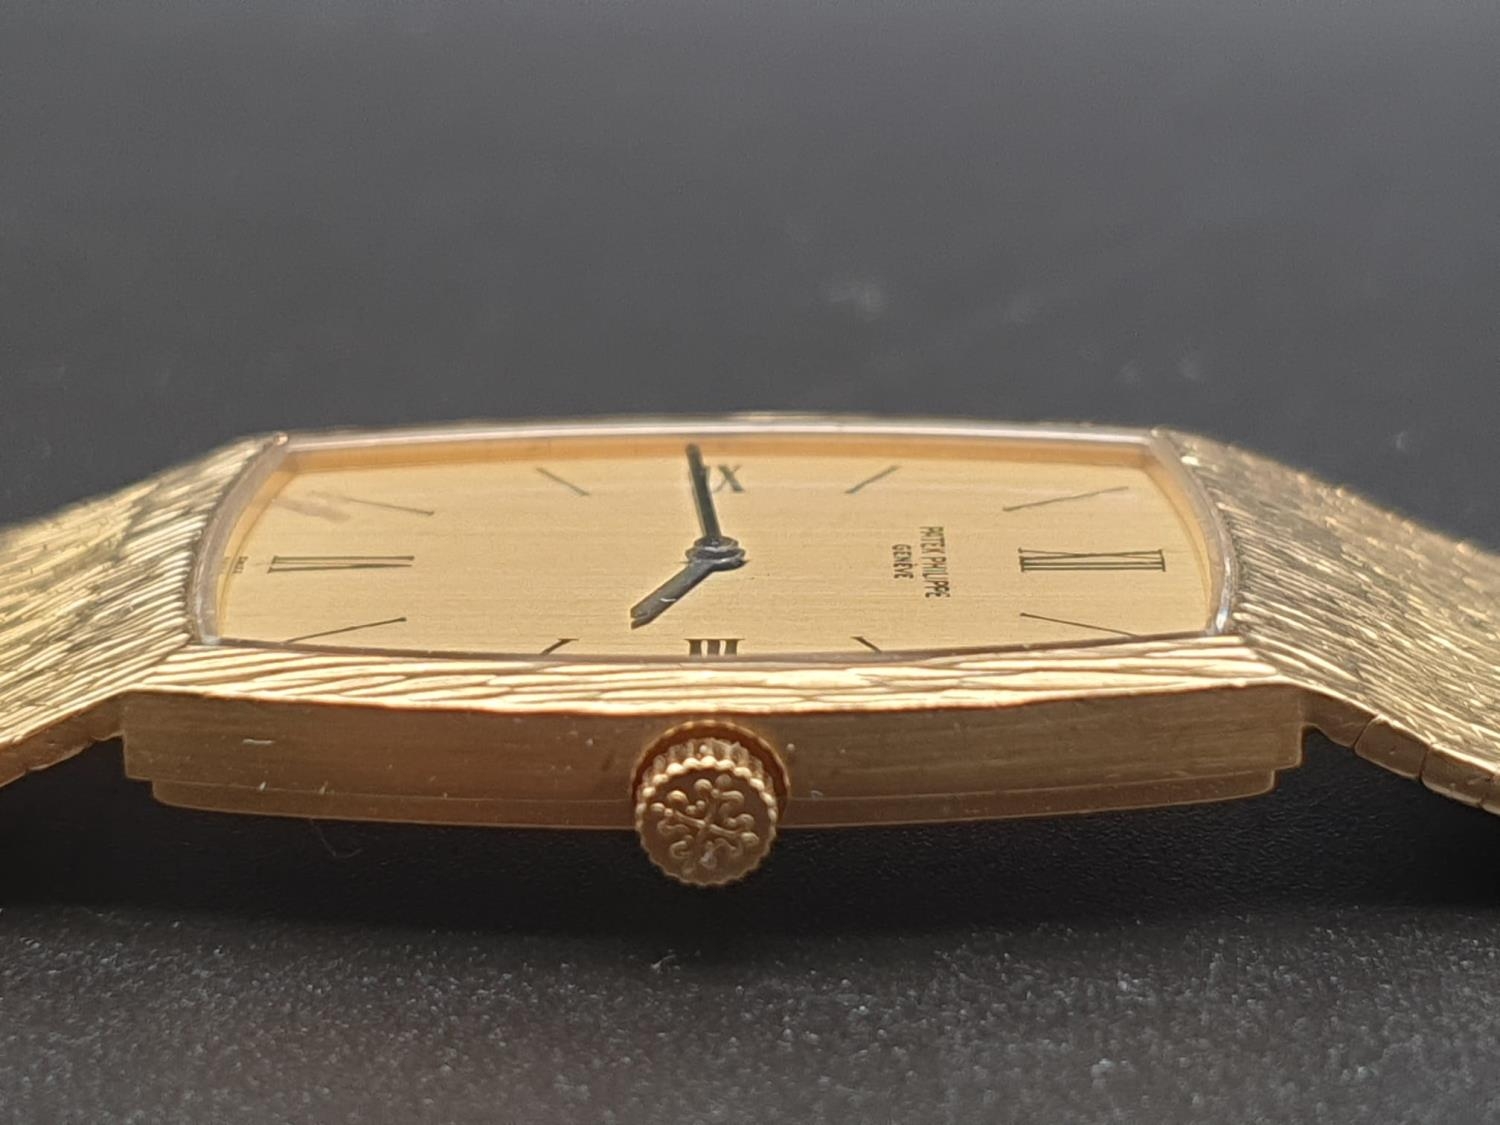 AN 18K GOLD PATEK PHILIPPE DRESS WATCH WITH SOLID GOLD BARKED STRAP. 28MM - Image 11 of 11